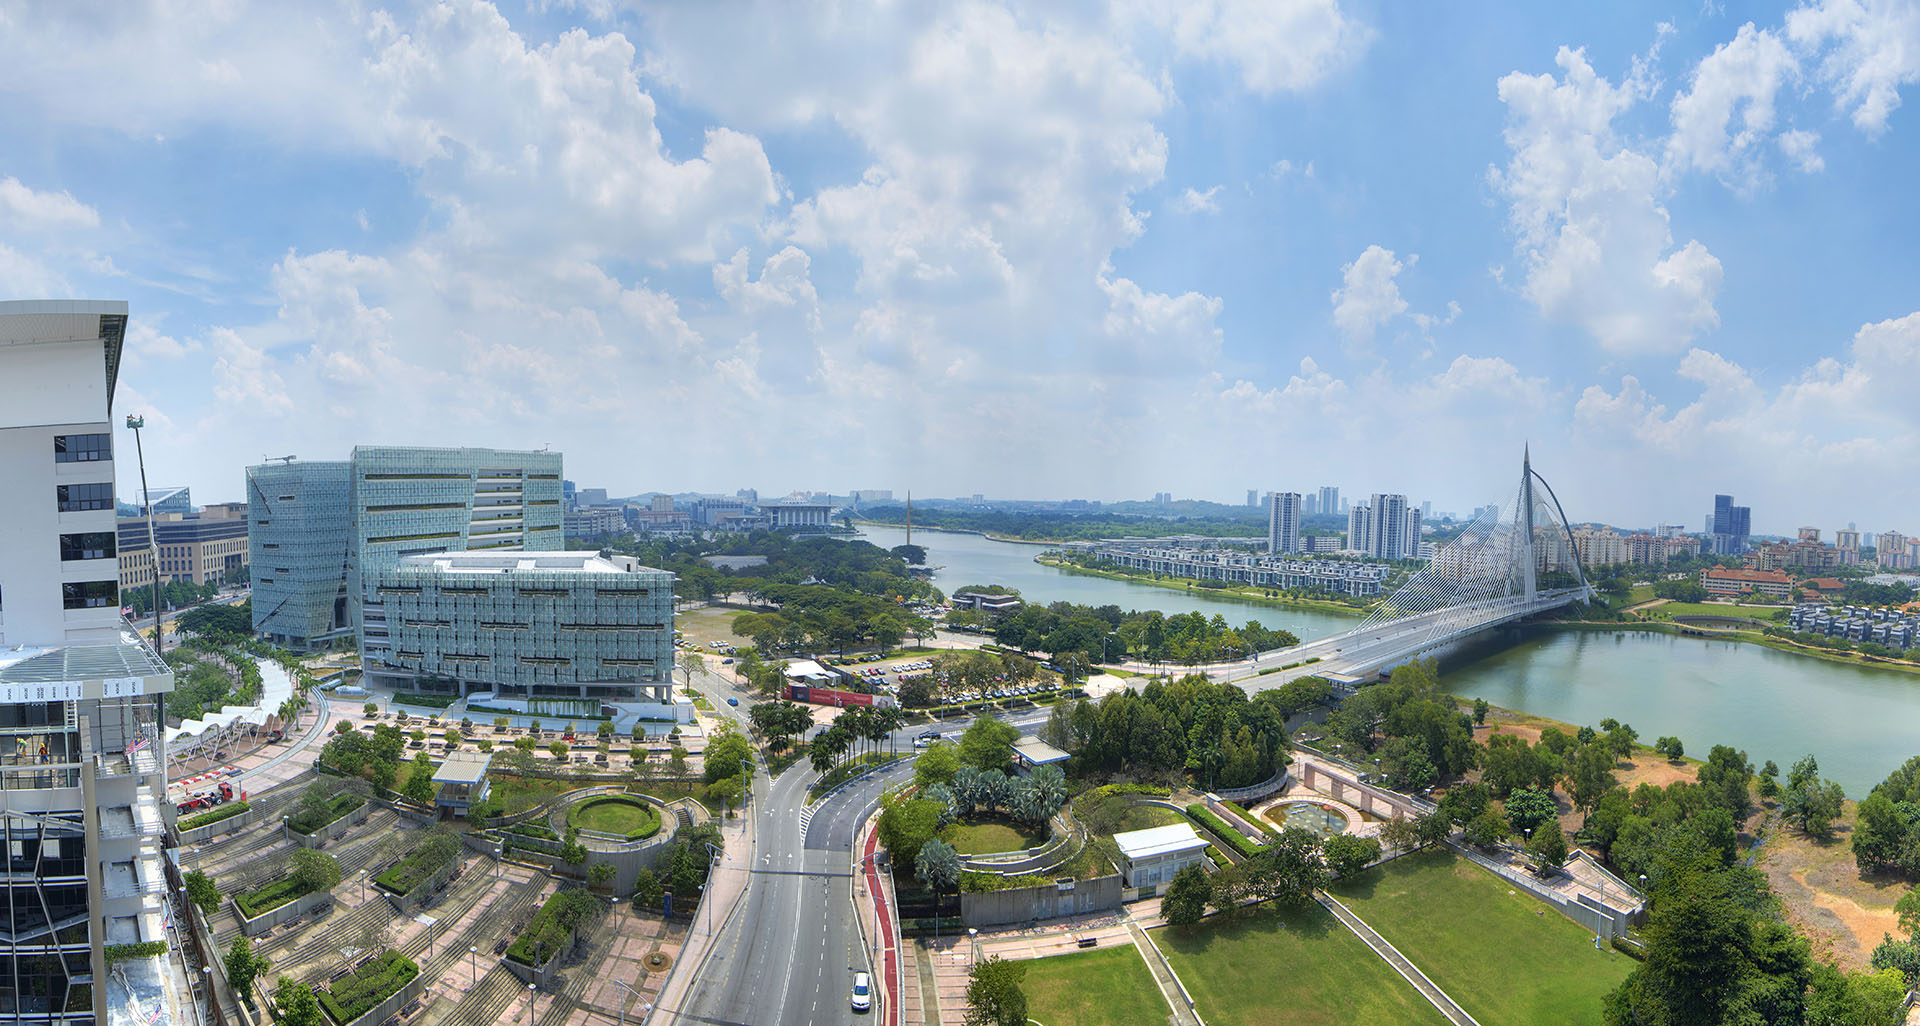 <p>The view from the north-west shows the project in relation to the monumental  bridge in Putrajaya.</p>